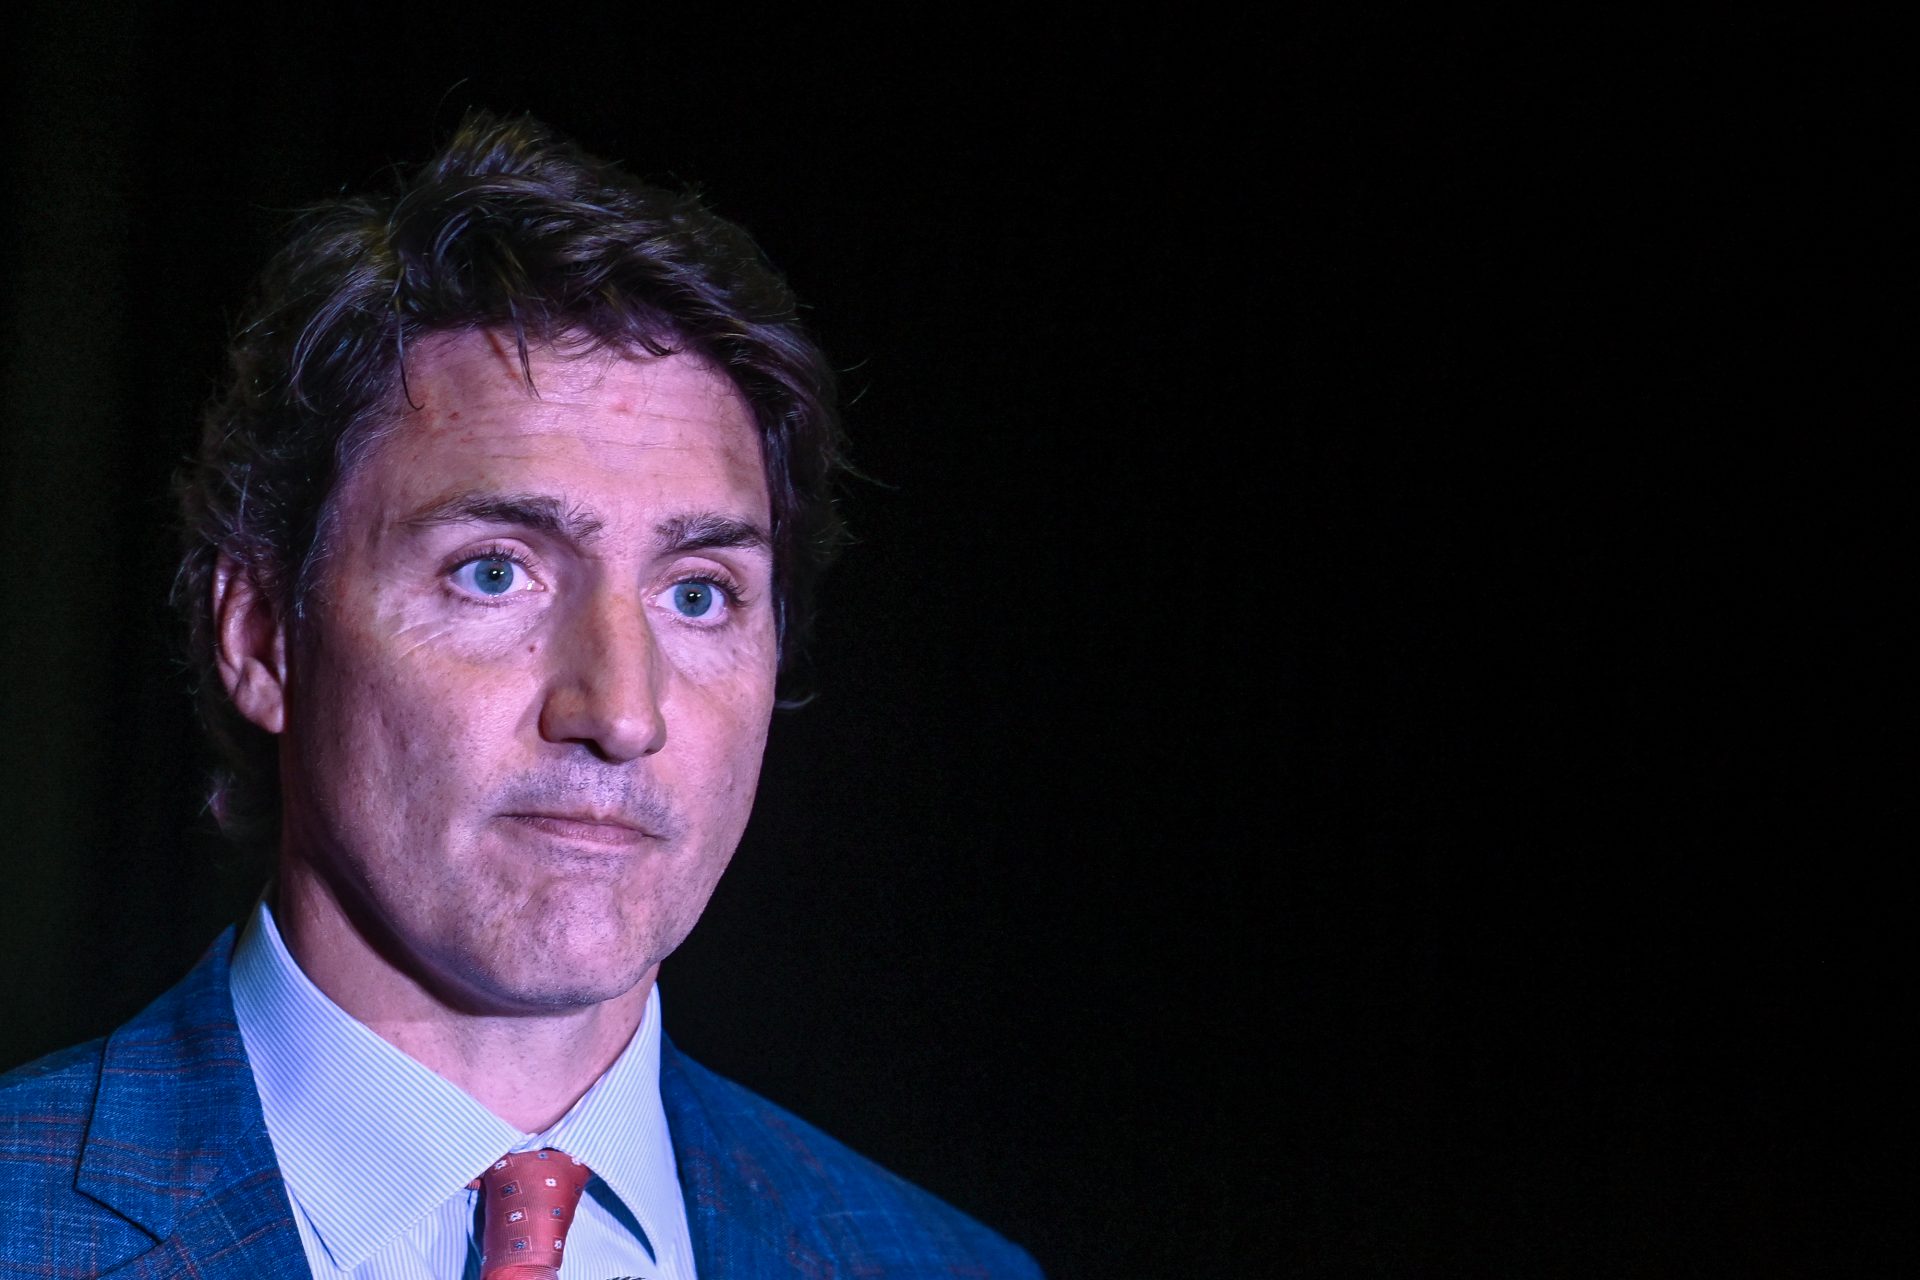 Pollster pessimistic about Trudeau and Liberal election chances